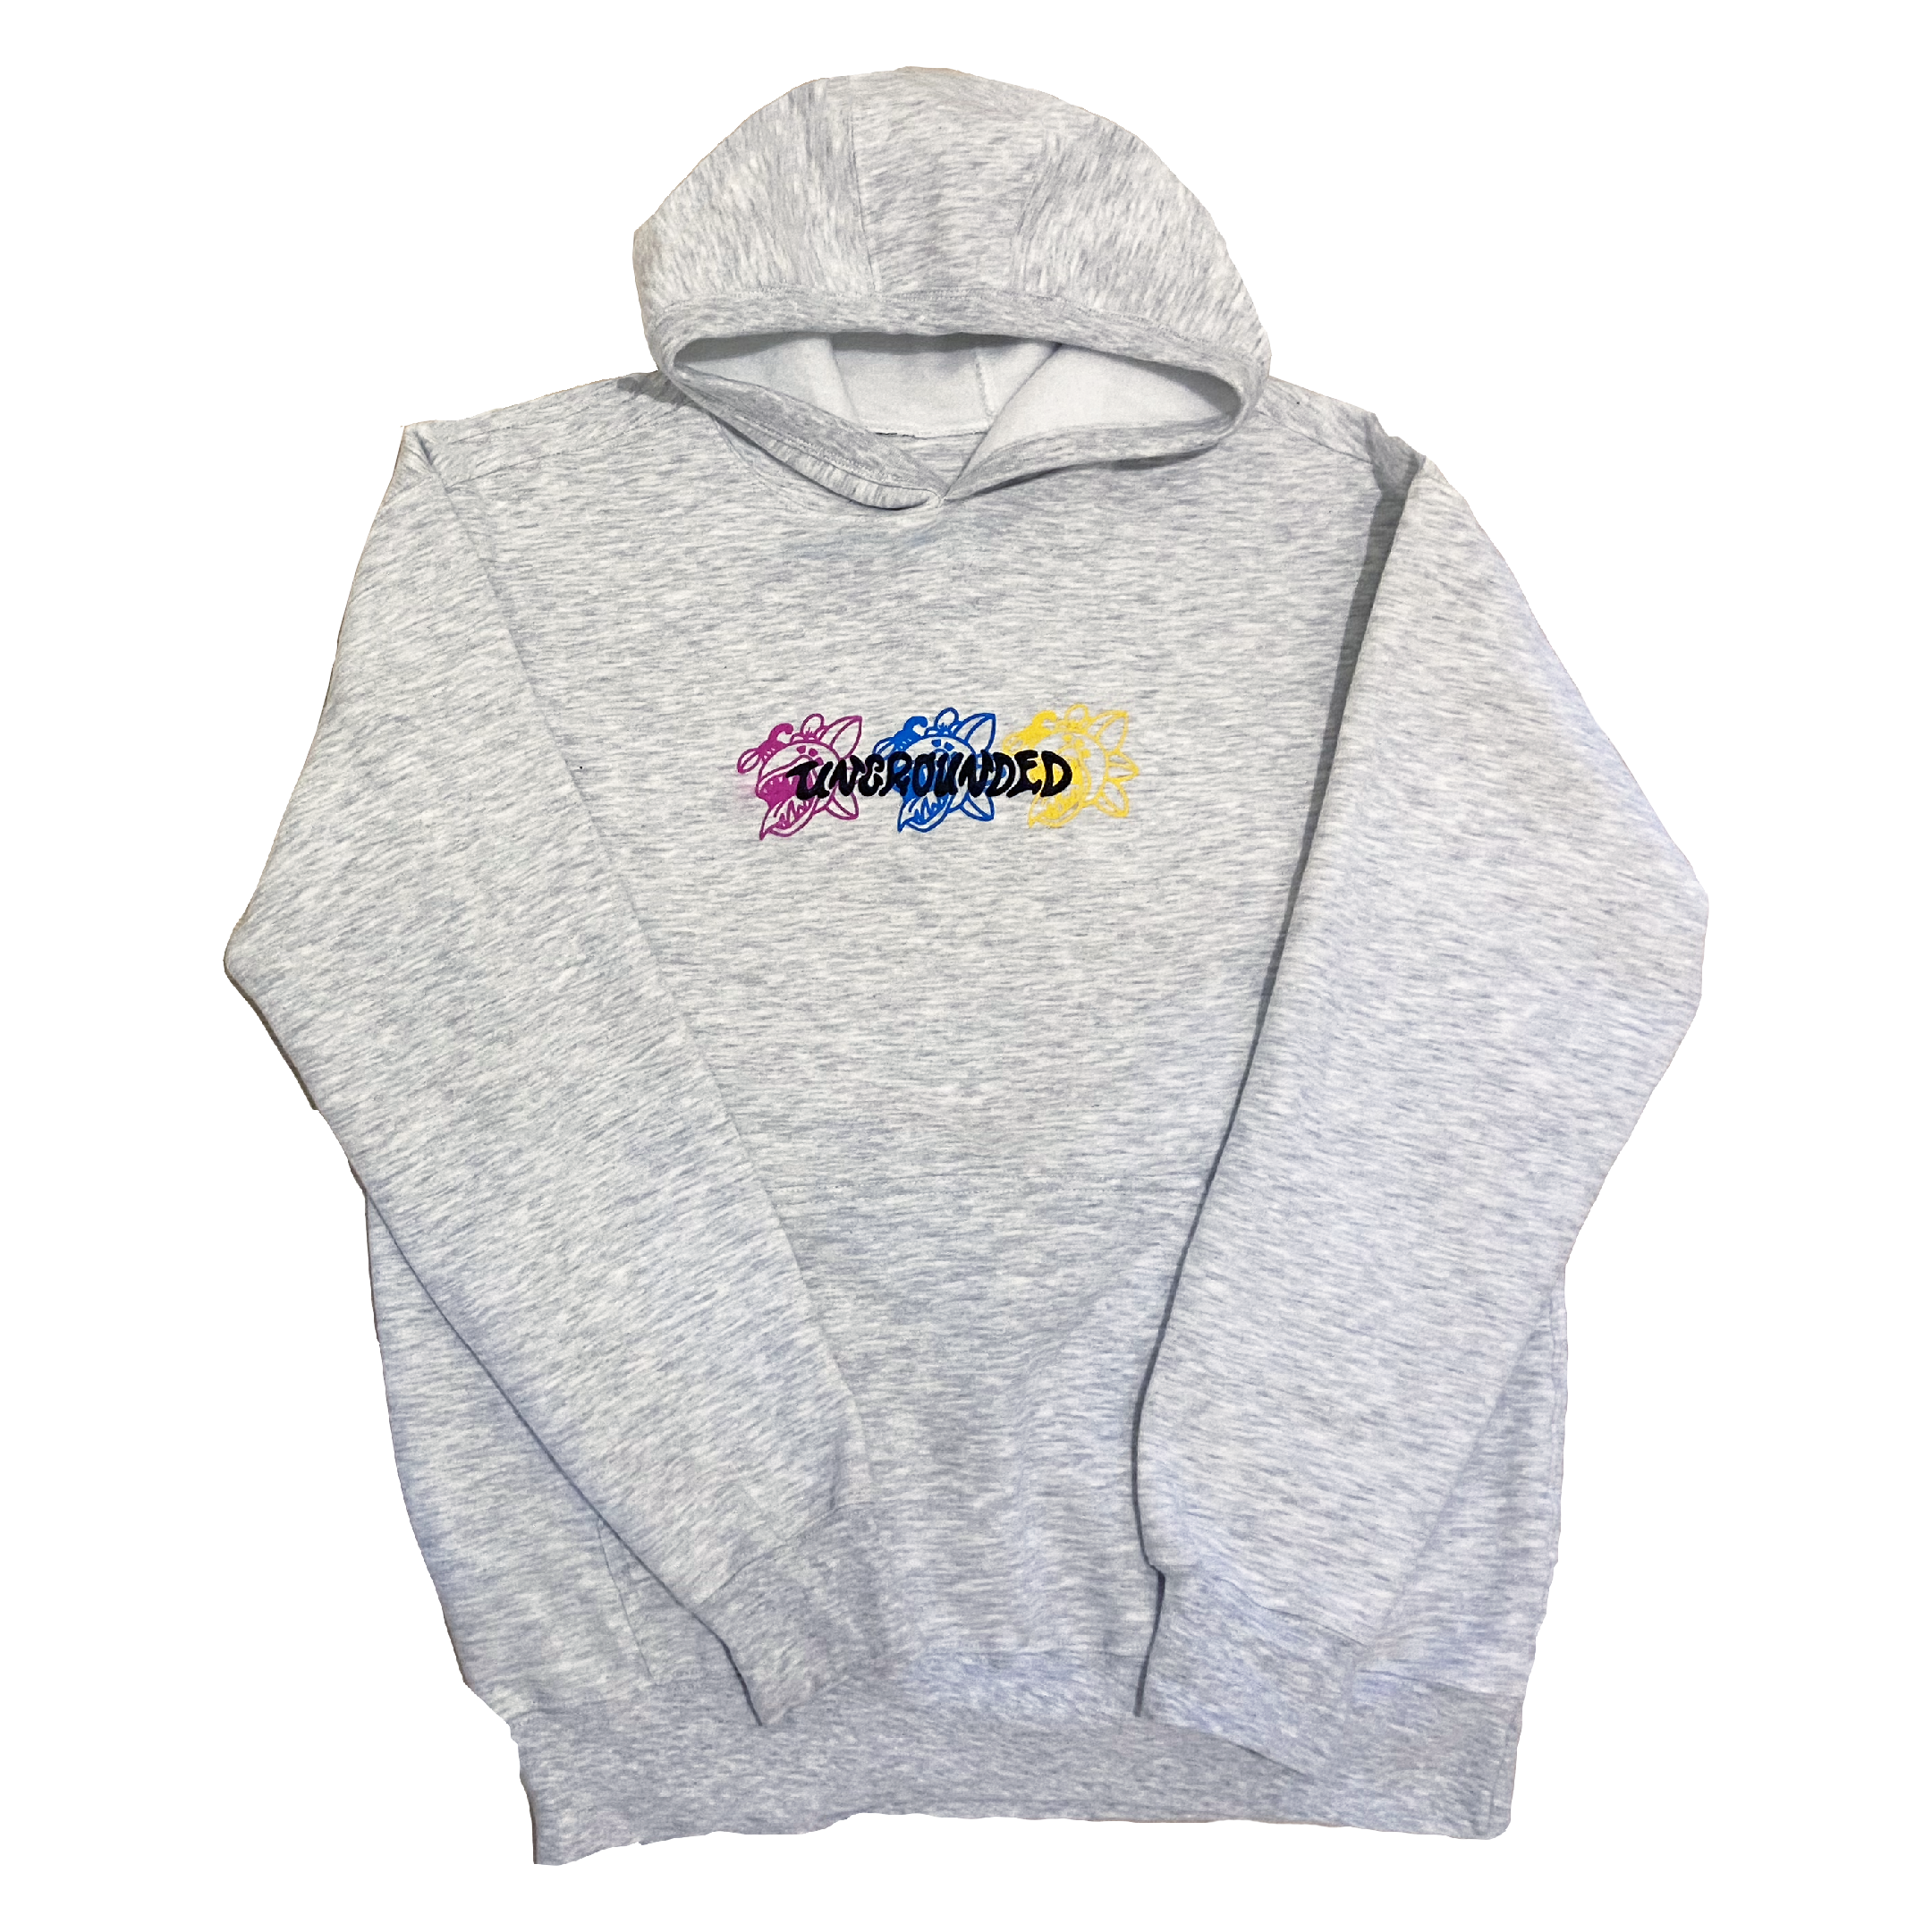 Ungrounded Grow Crazy Hoodie (Ash White)